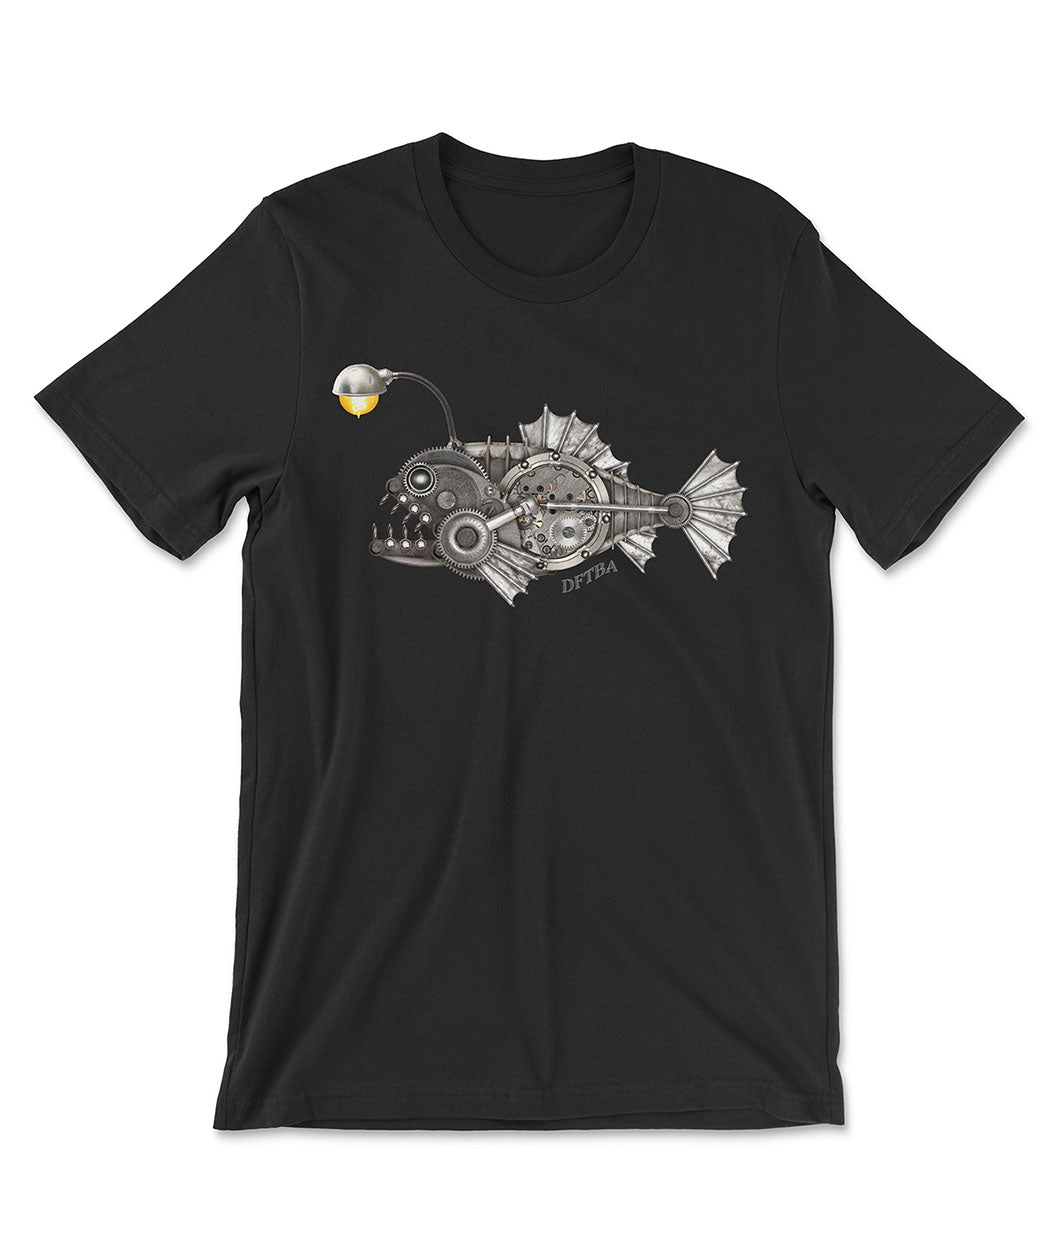 A black t-shirt with a metal steampunk styled anglerfish with the text DFTBA small below it. 